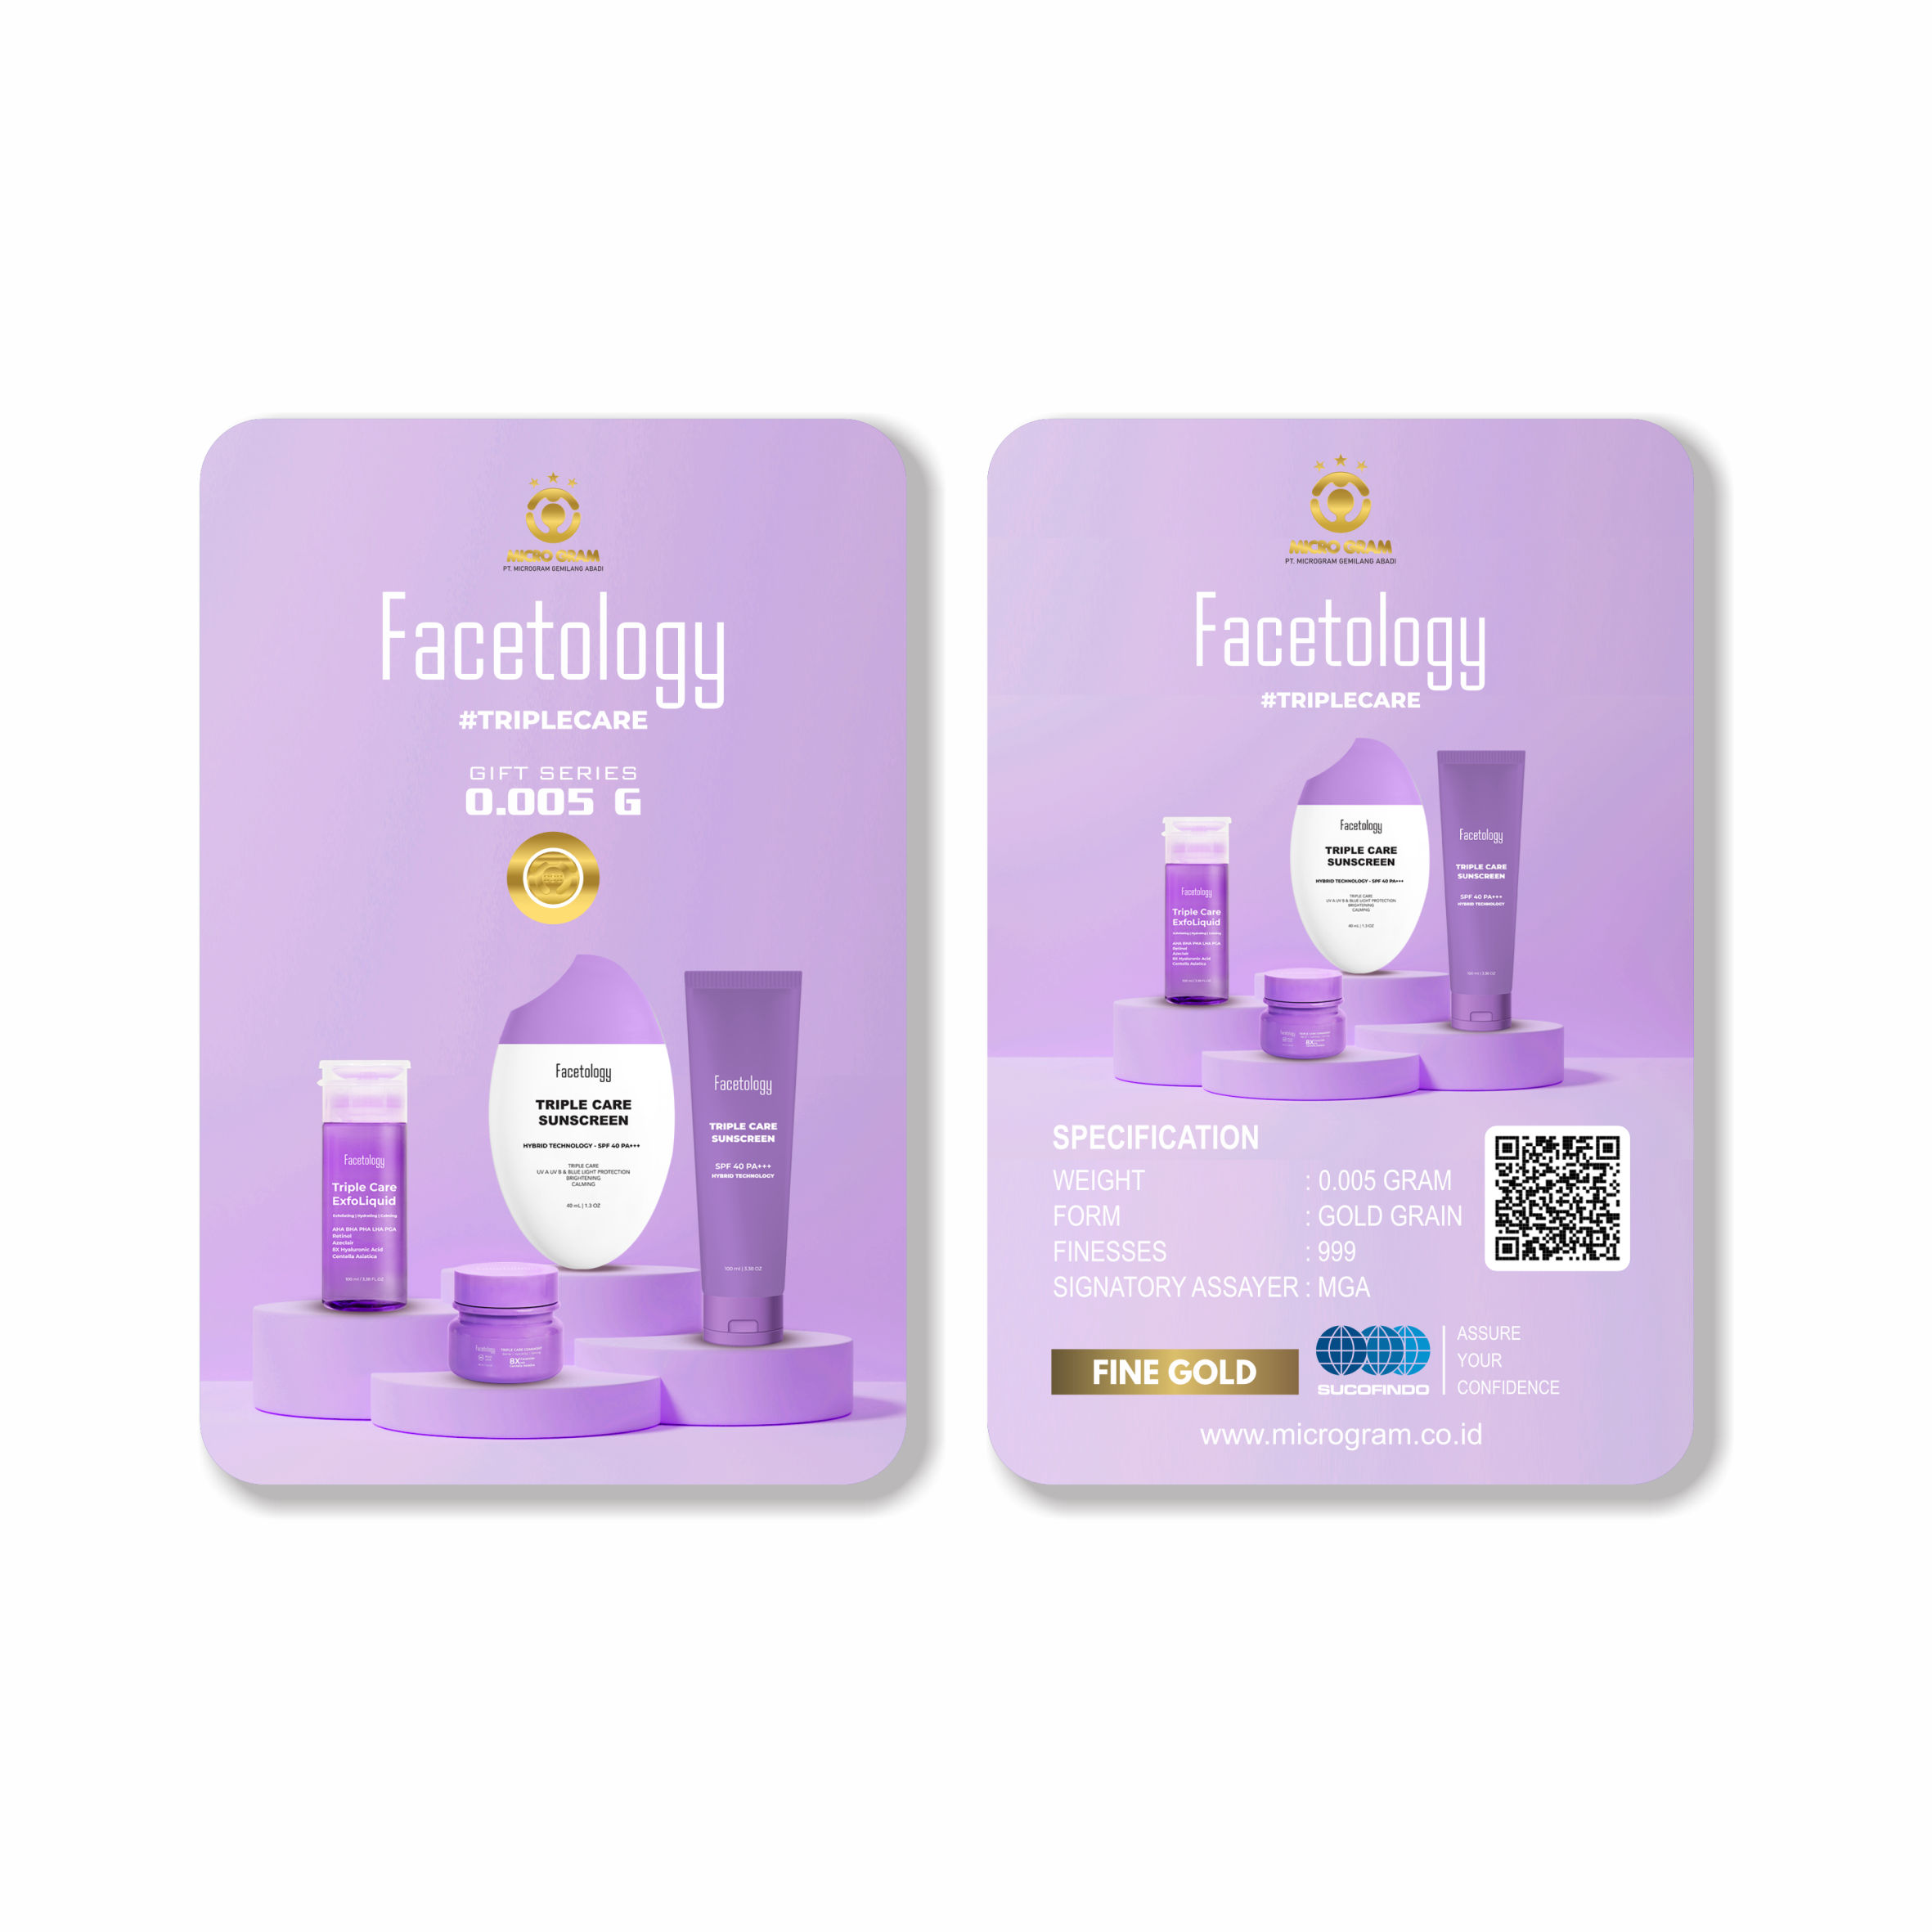 Gift Series Facetology 0.005